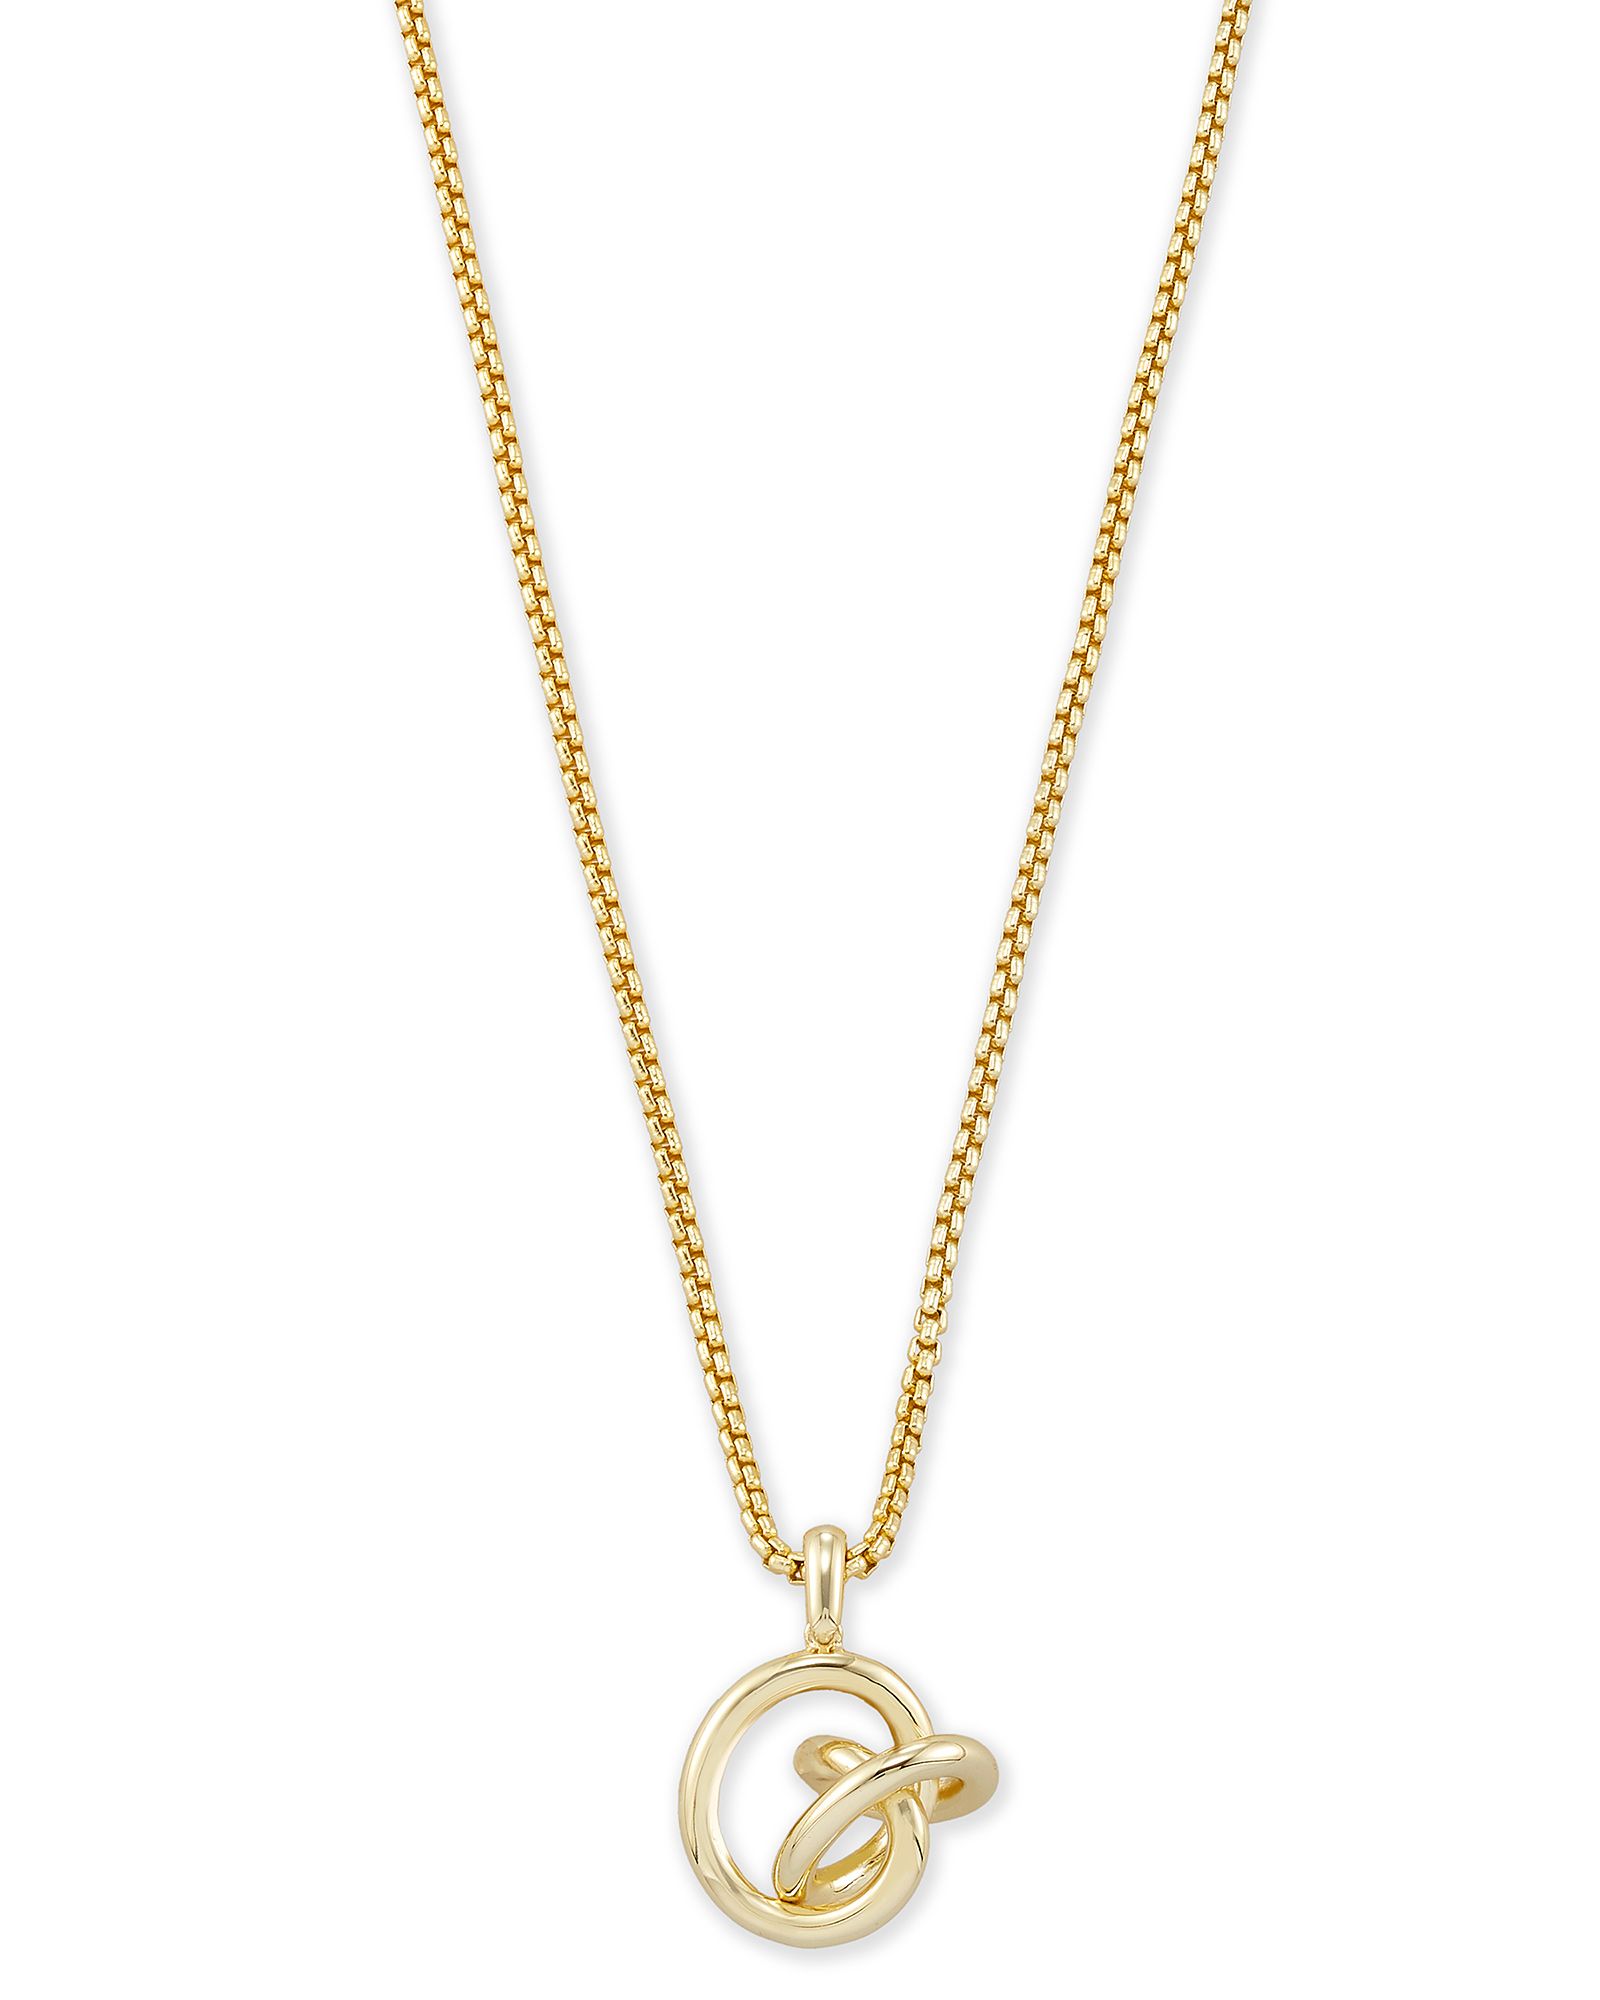 Presleigh Love Knot Pendant Necklace in Gold | Kendra Scott